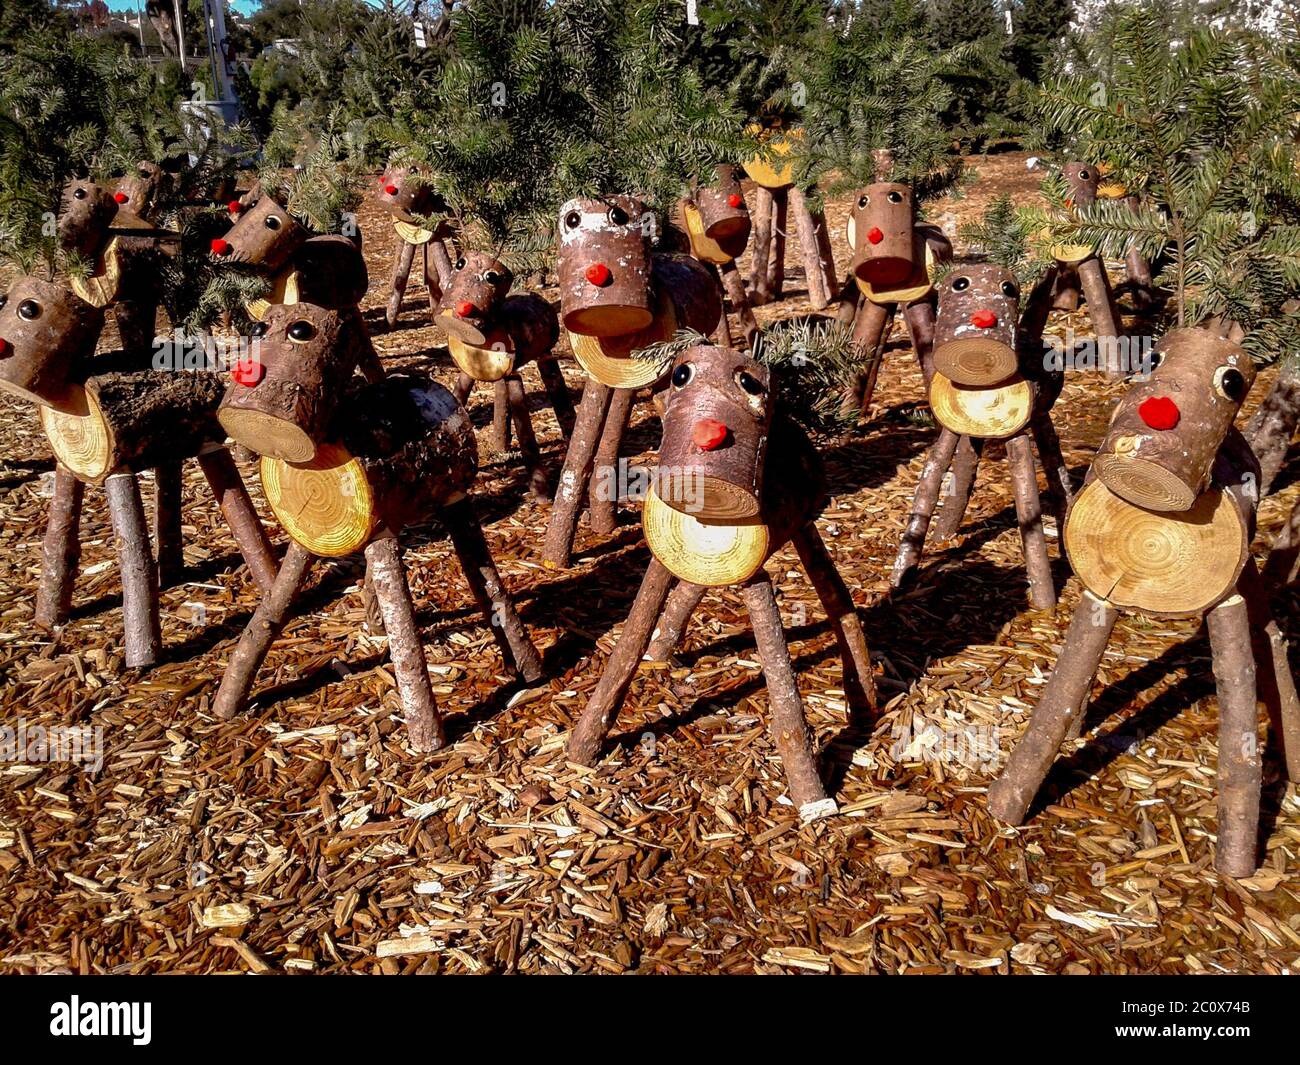 Wooden models of Rudolph the Red Nosed Reindeer made from sawn logs are for sale at Christmas time in Laguna Niguel, CA. Stock Photo